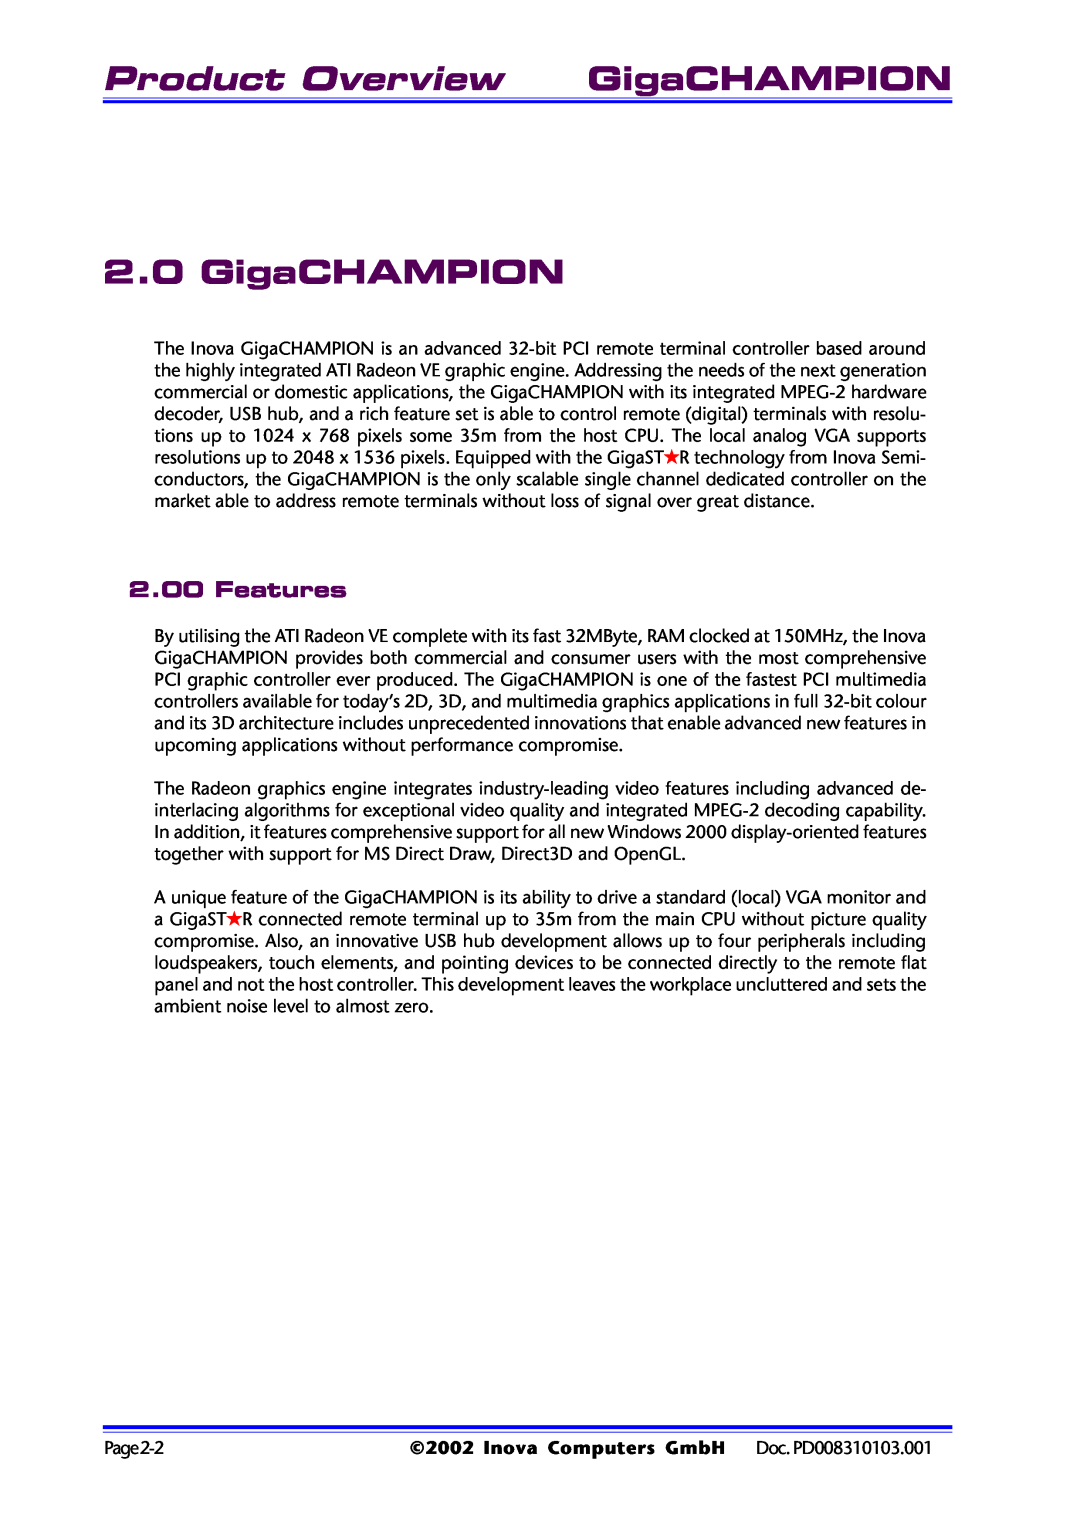 Inova PD008310103.001 AB user manual Product Overview GigaCHAMPION, Features, Inova Computers GmbH Doc. PD008310103.001 